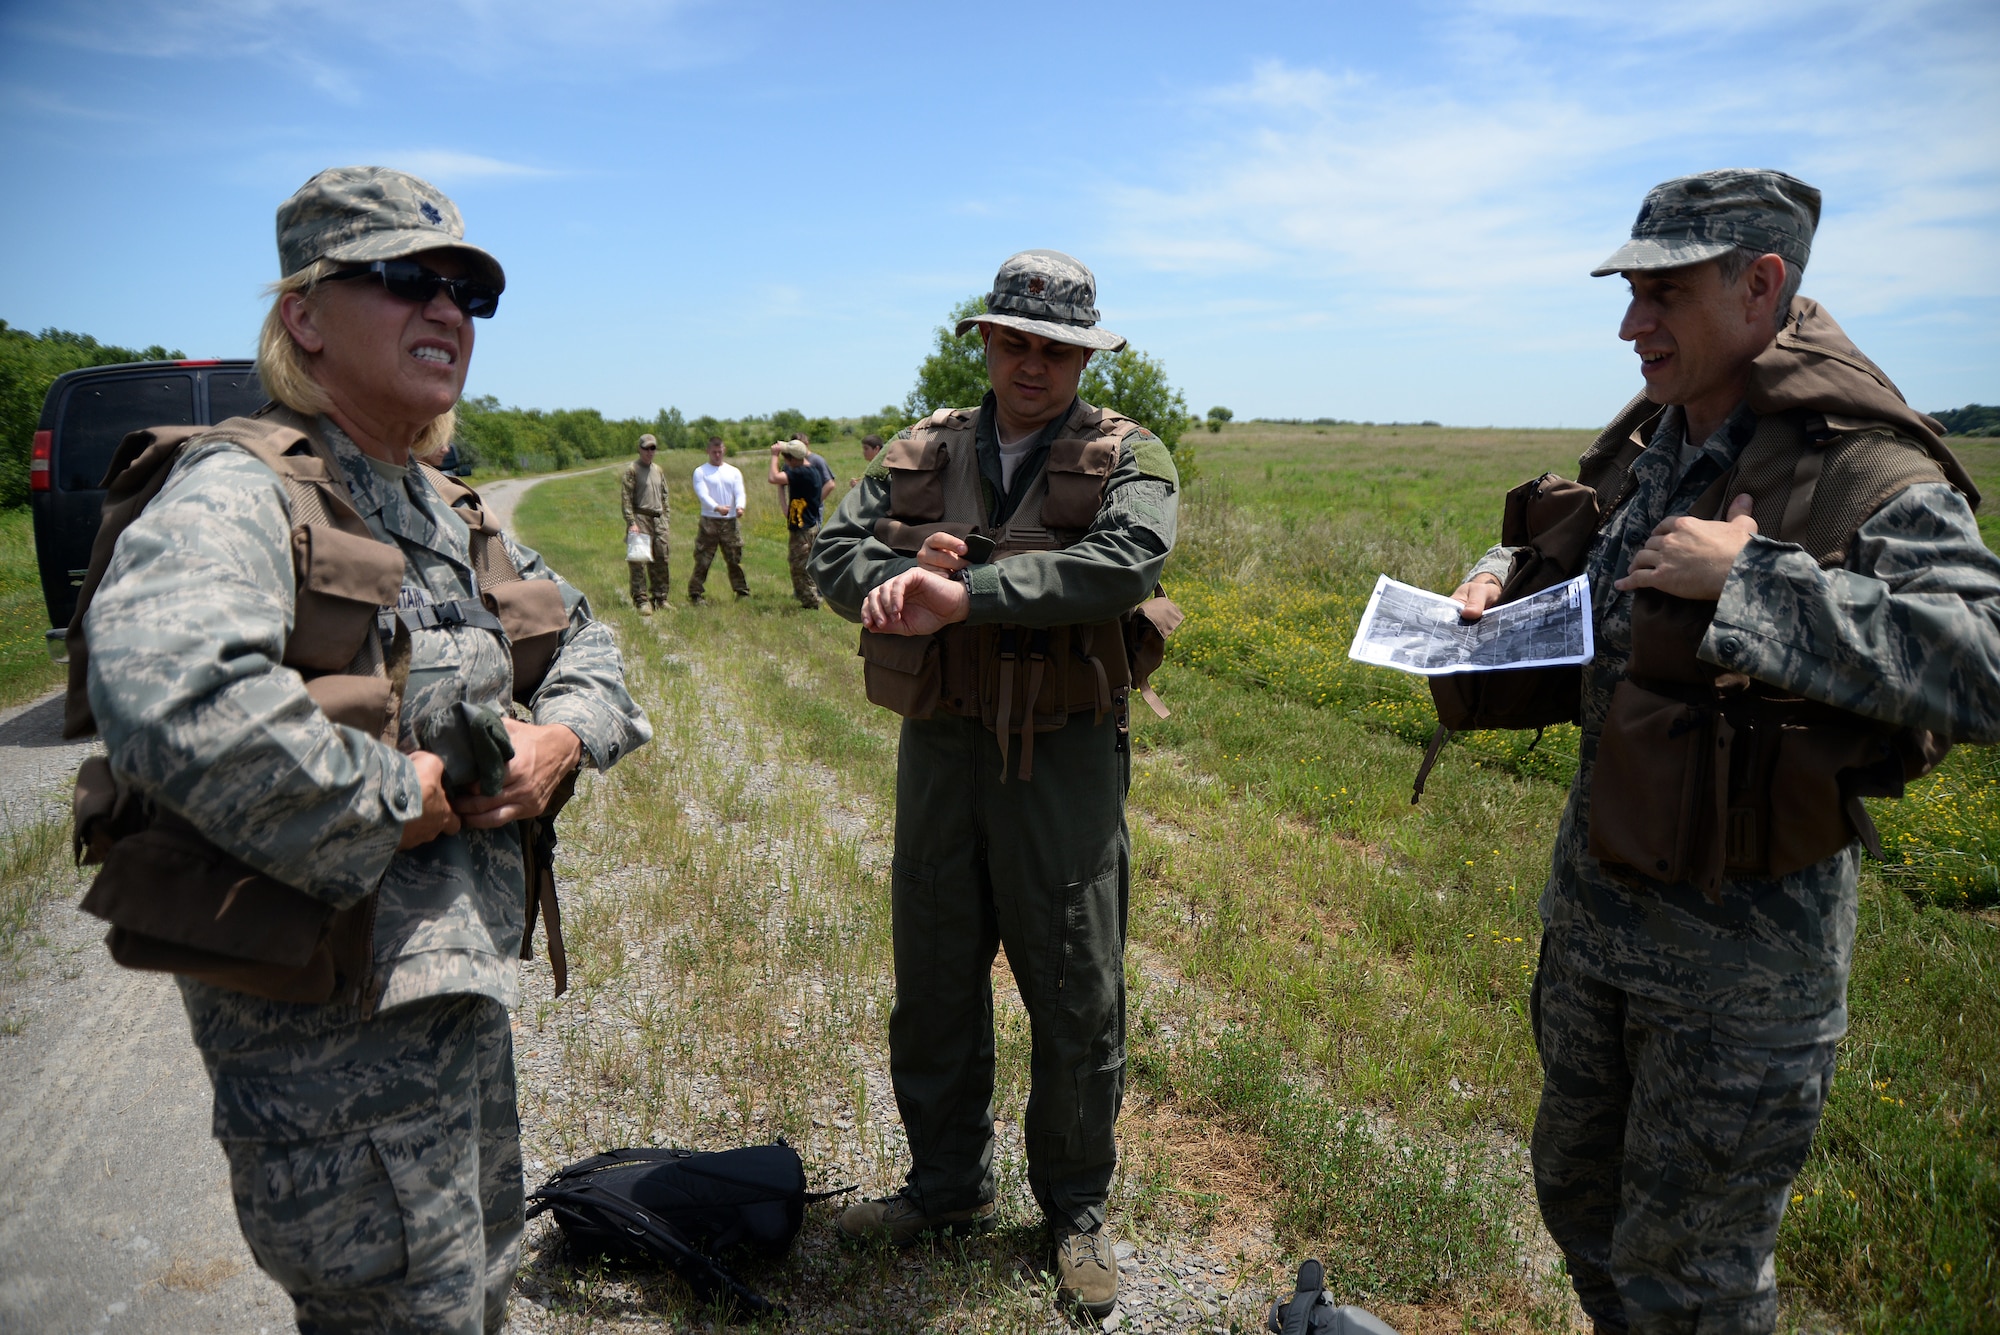 Participants of the combat survival training portion of the Survival, Evasion, Resistance, and Escape, or SERE, training prepare for a field exercise July 14, 2015, at Sparta, Ill. Scott Air Force Base has a team of specialists that teach pilots and aircrew SERE techniques each month. The training is split up into two portions: combat survival training and water survival training. (U.S. Air Force photo/Senior Airman Jake Eckhardt)